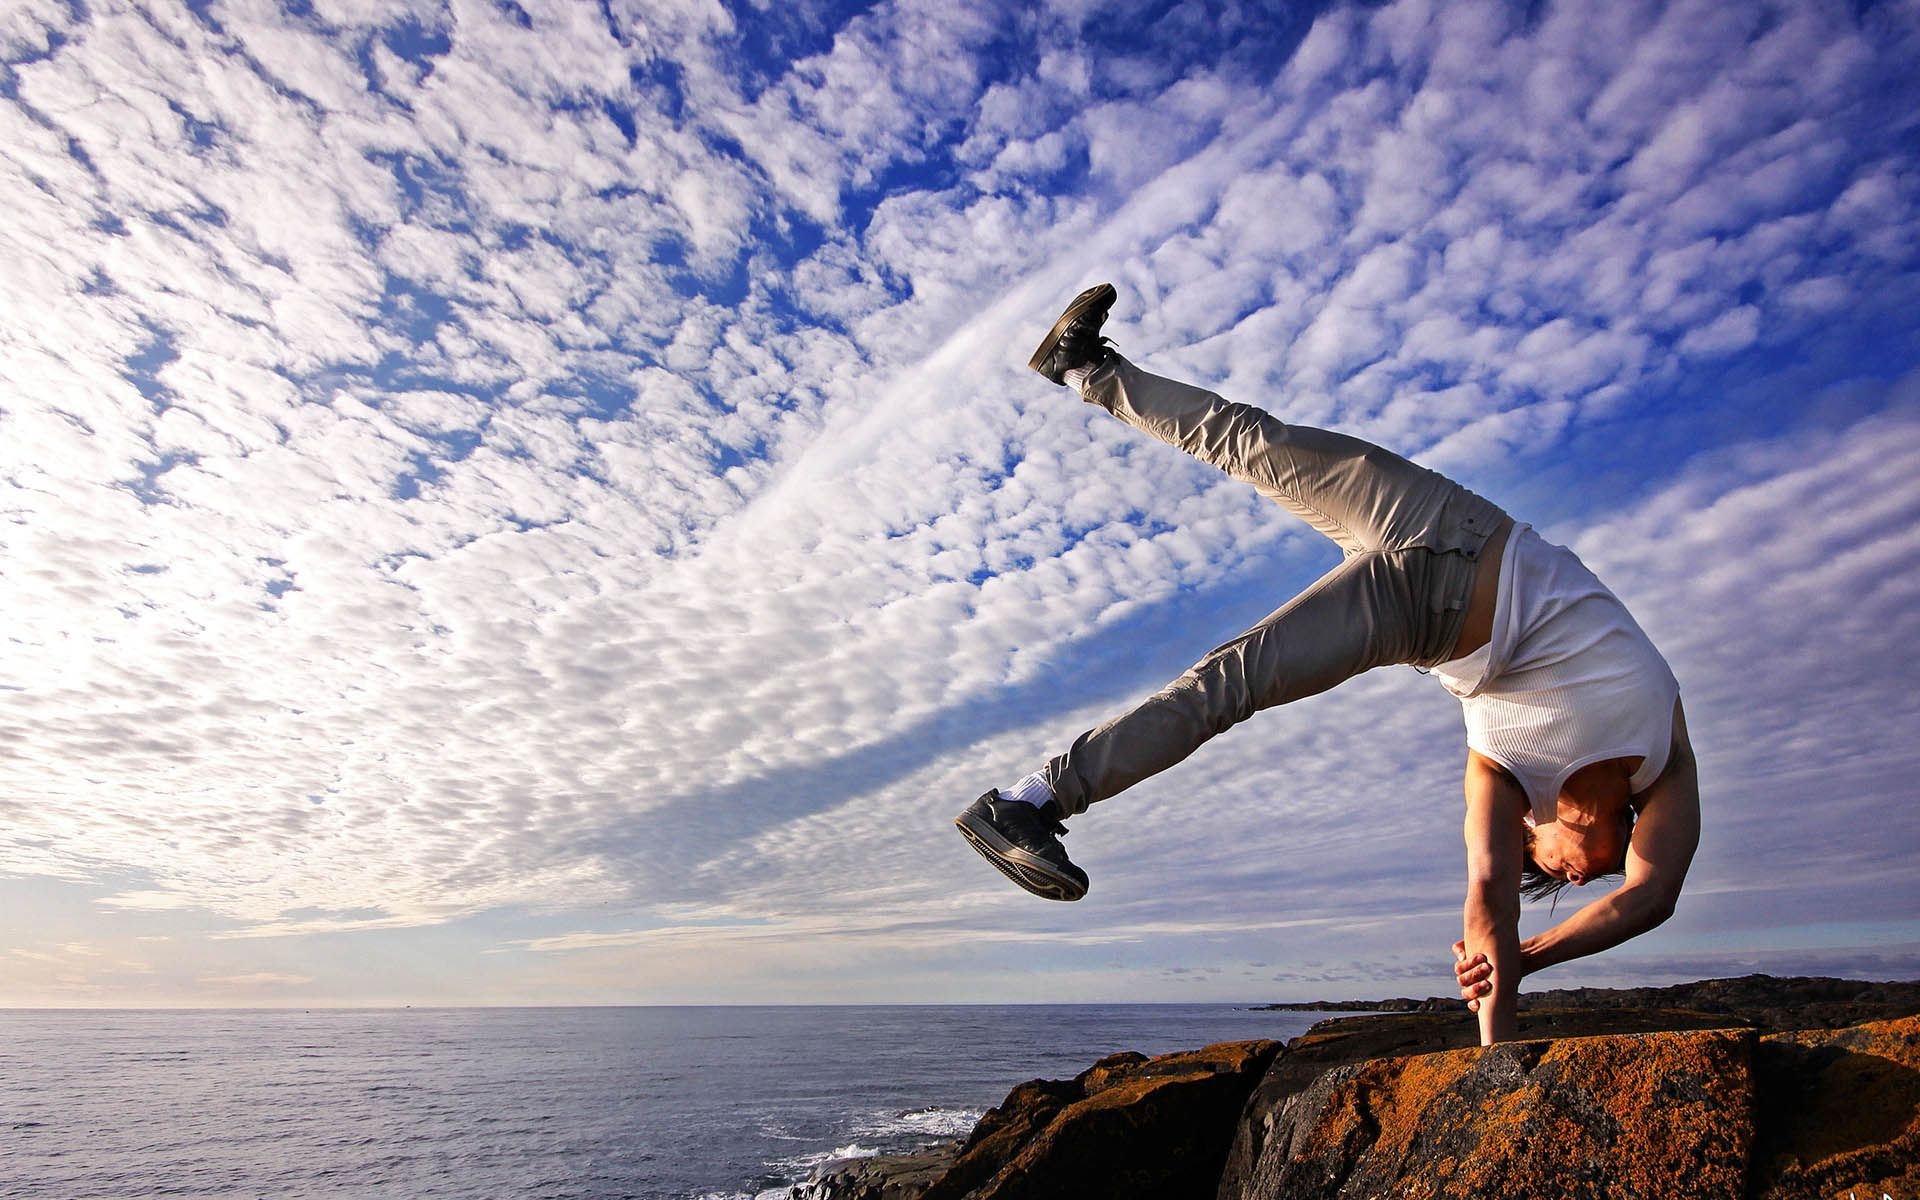 Acrobatic Gymnastics: Handstand performed by a male athlete at the top of a rock, Outdoor activity. 1920x1200 HD Background.